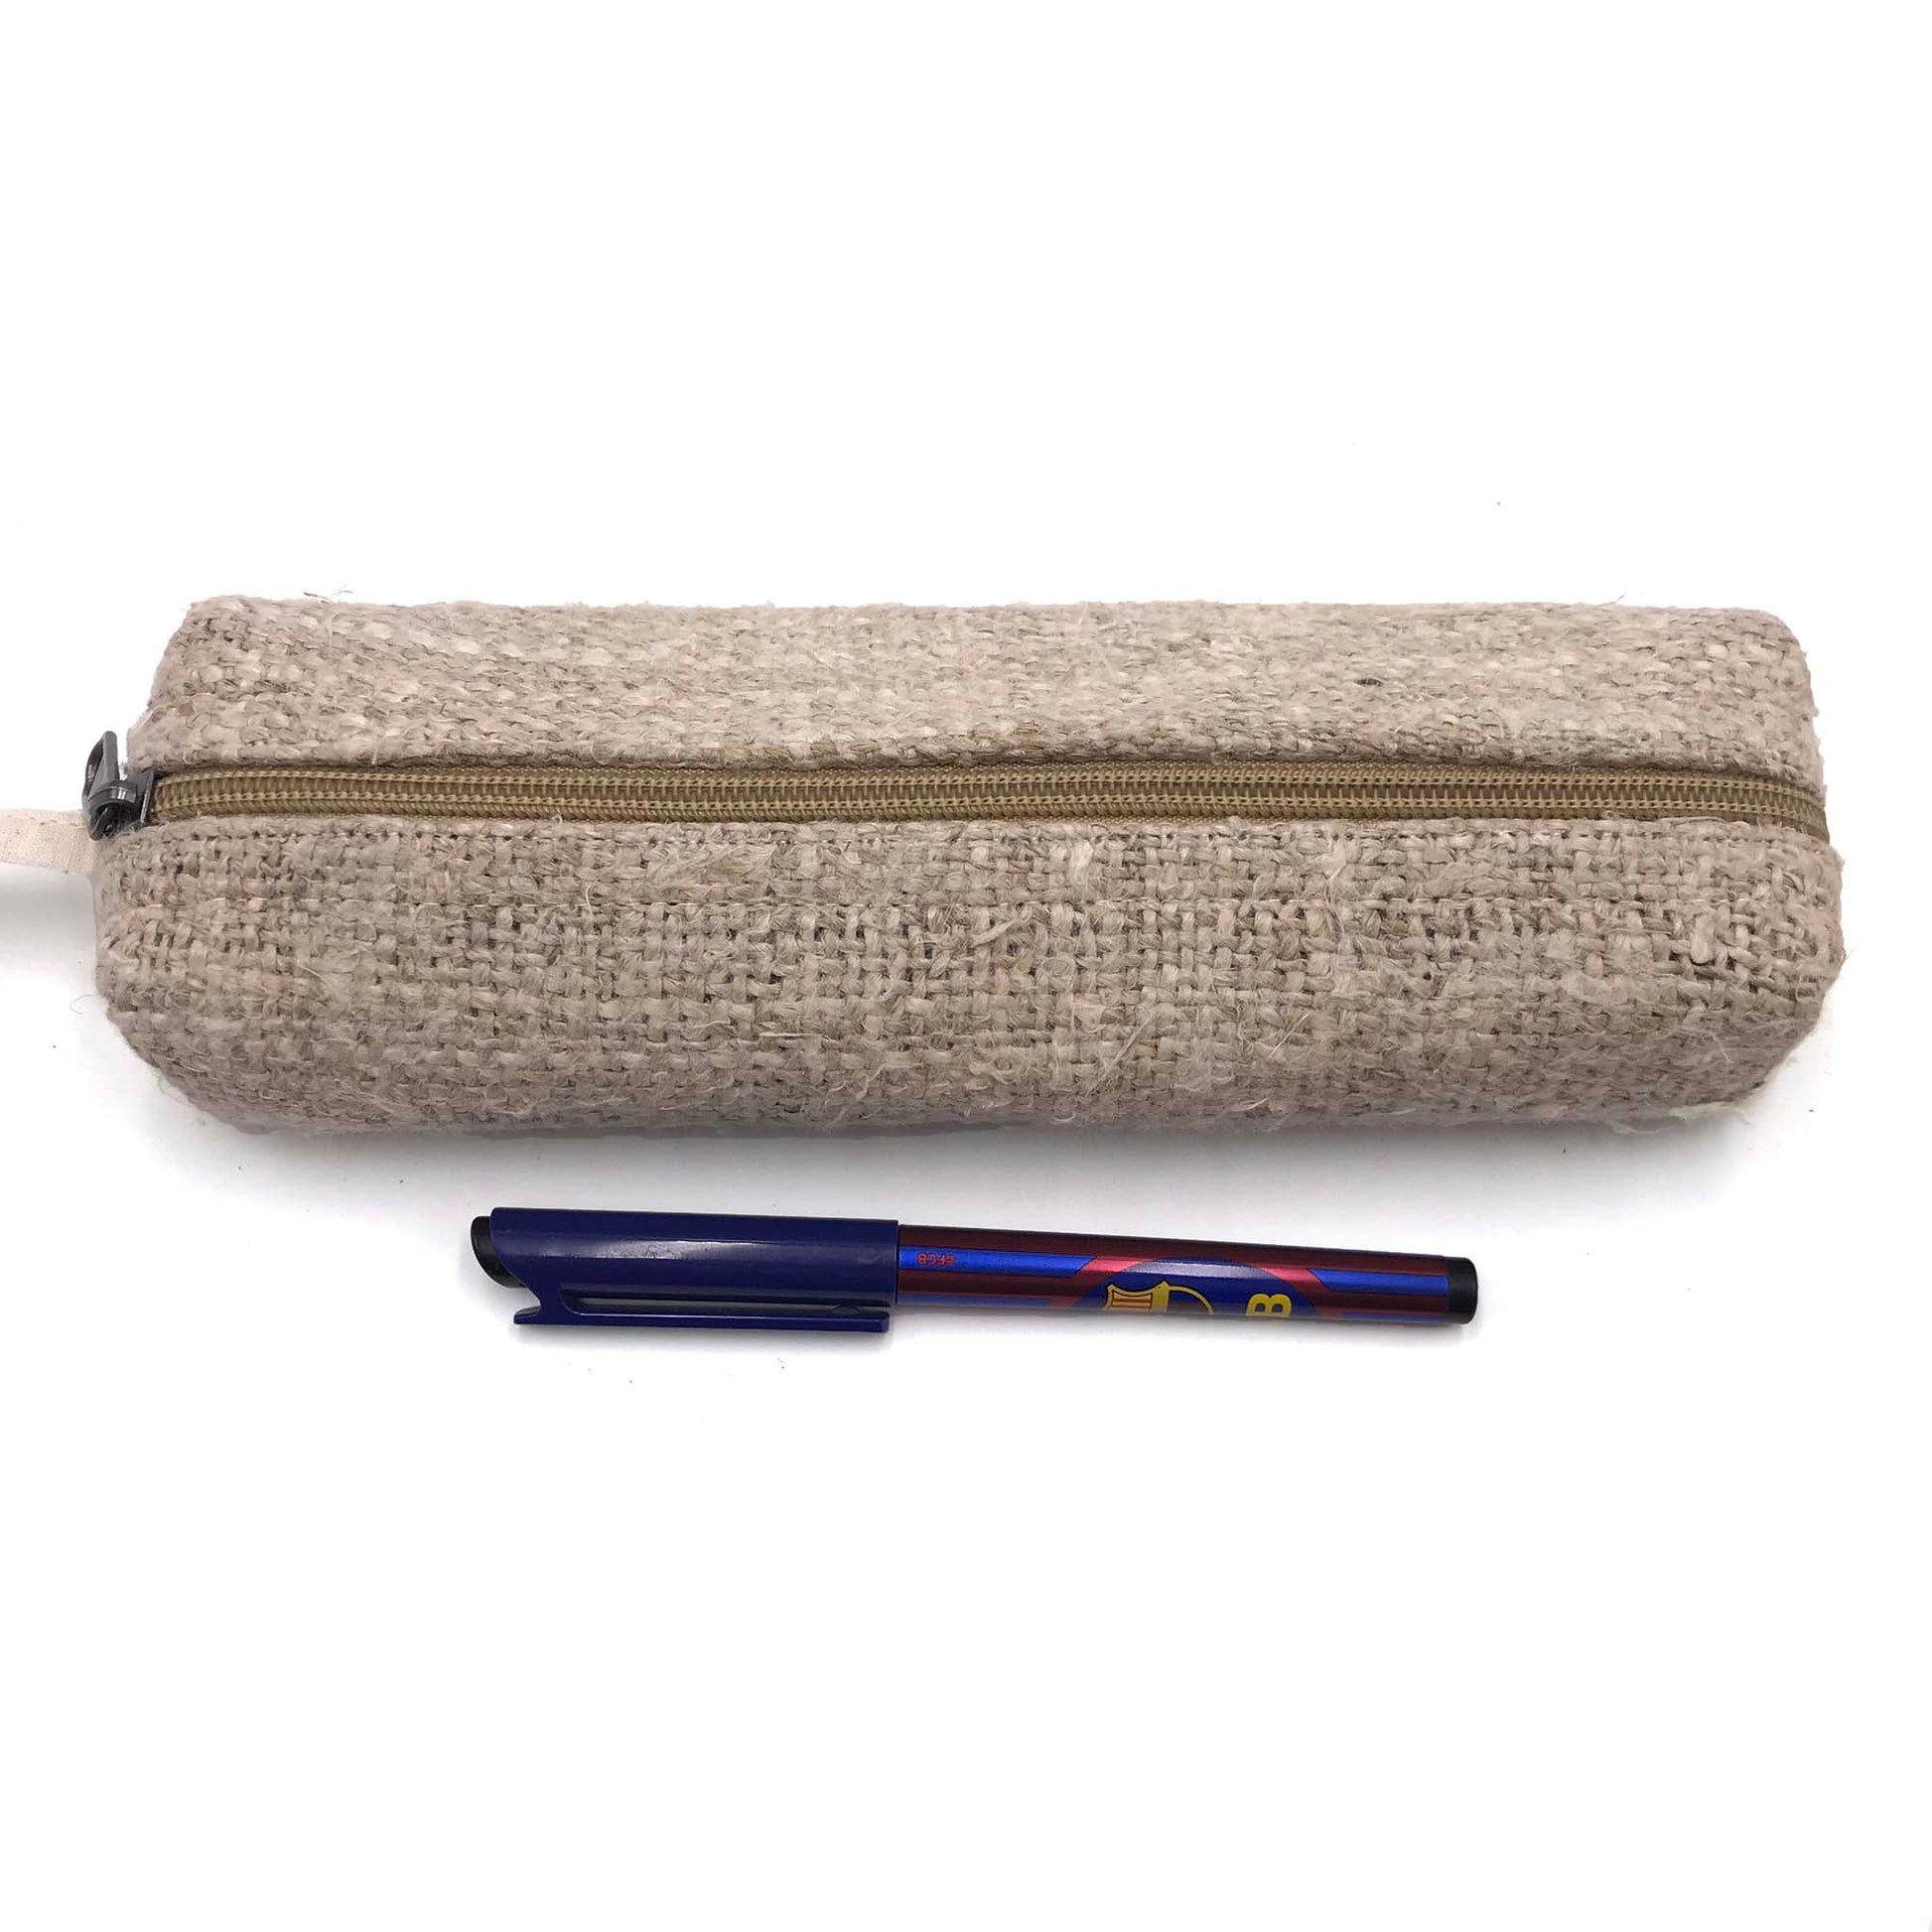 Hemp Bags, pouches and wallets made from 100% pure and natural hand-woven HEMP